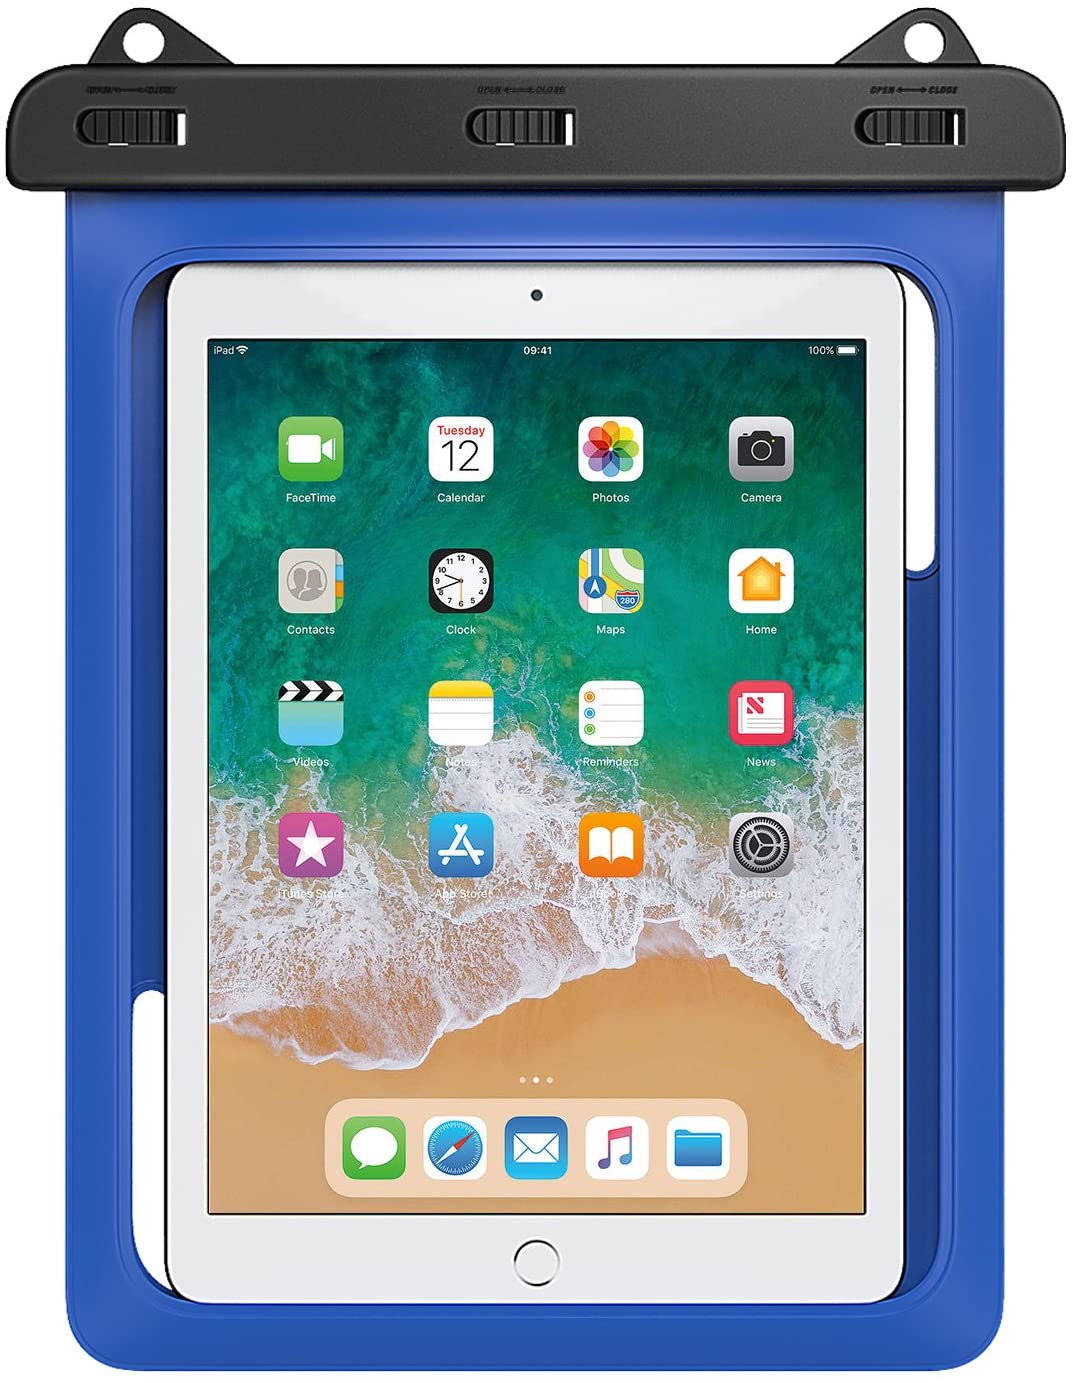 Best waterproof iPad case: A dry bag option from MoKo is affordable, but offers less drop protection.